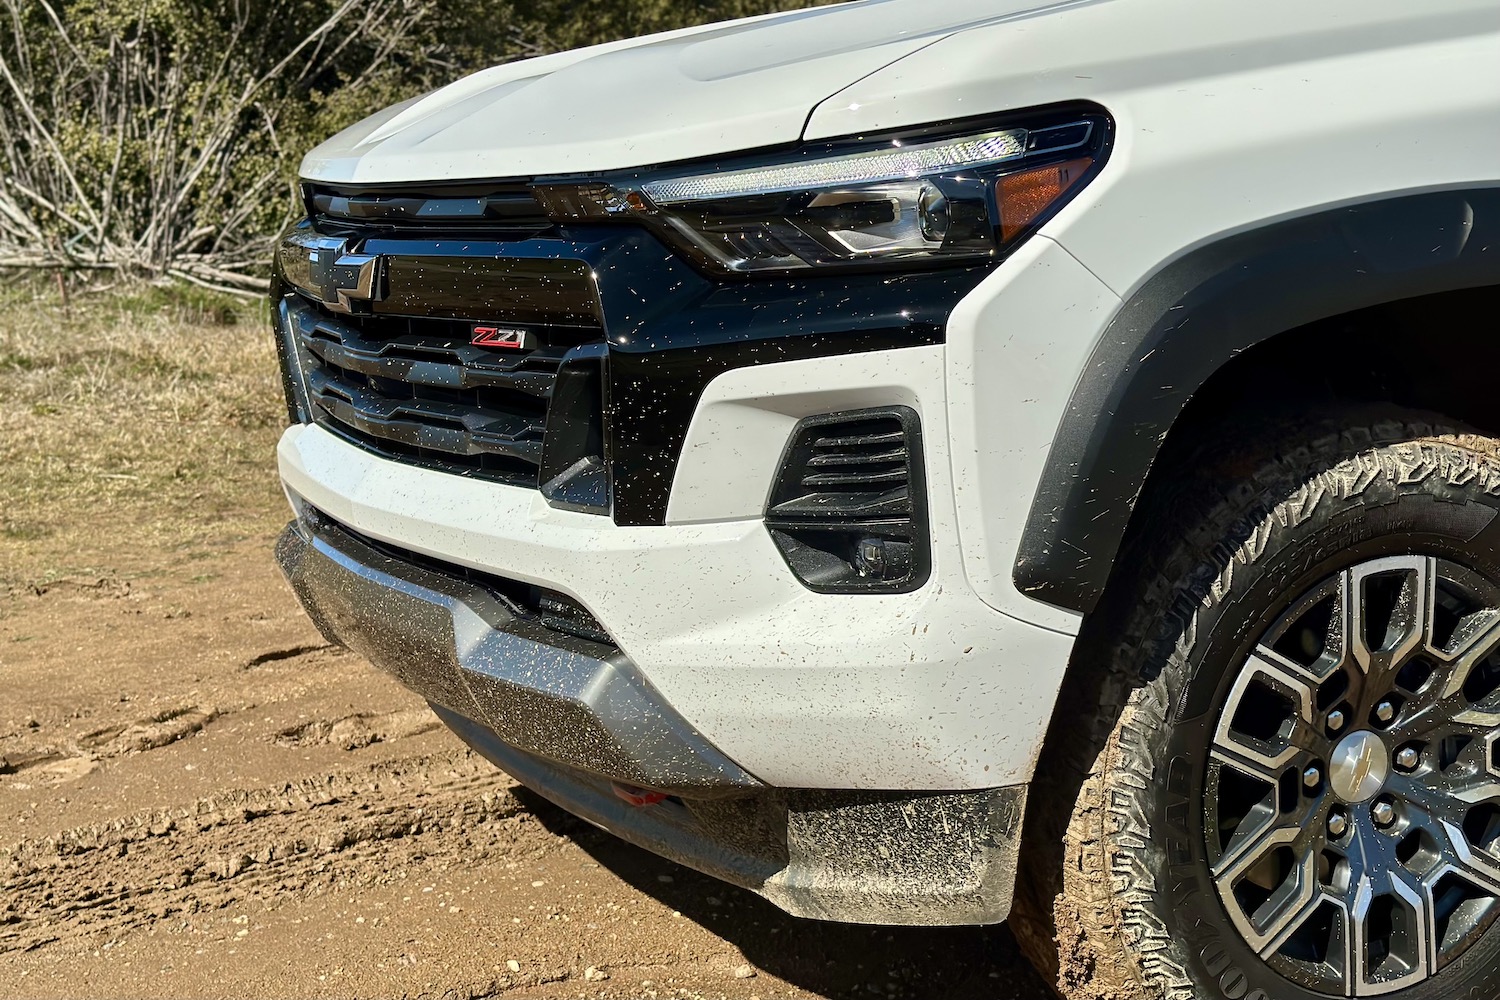 Close up of the headlights, grille, and front fascia on the 2023 Chevrolet Colorado Z71 parked in a muddy field.